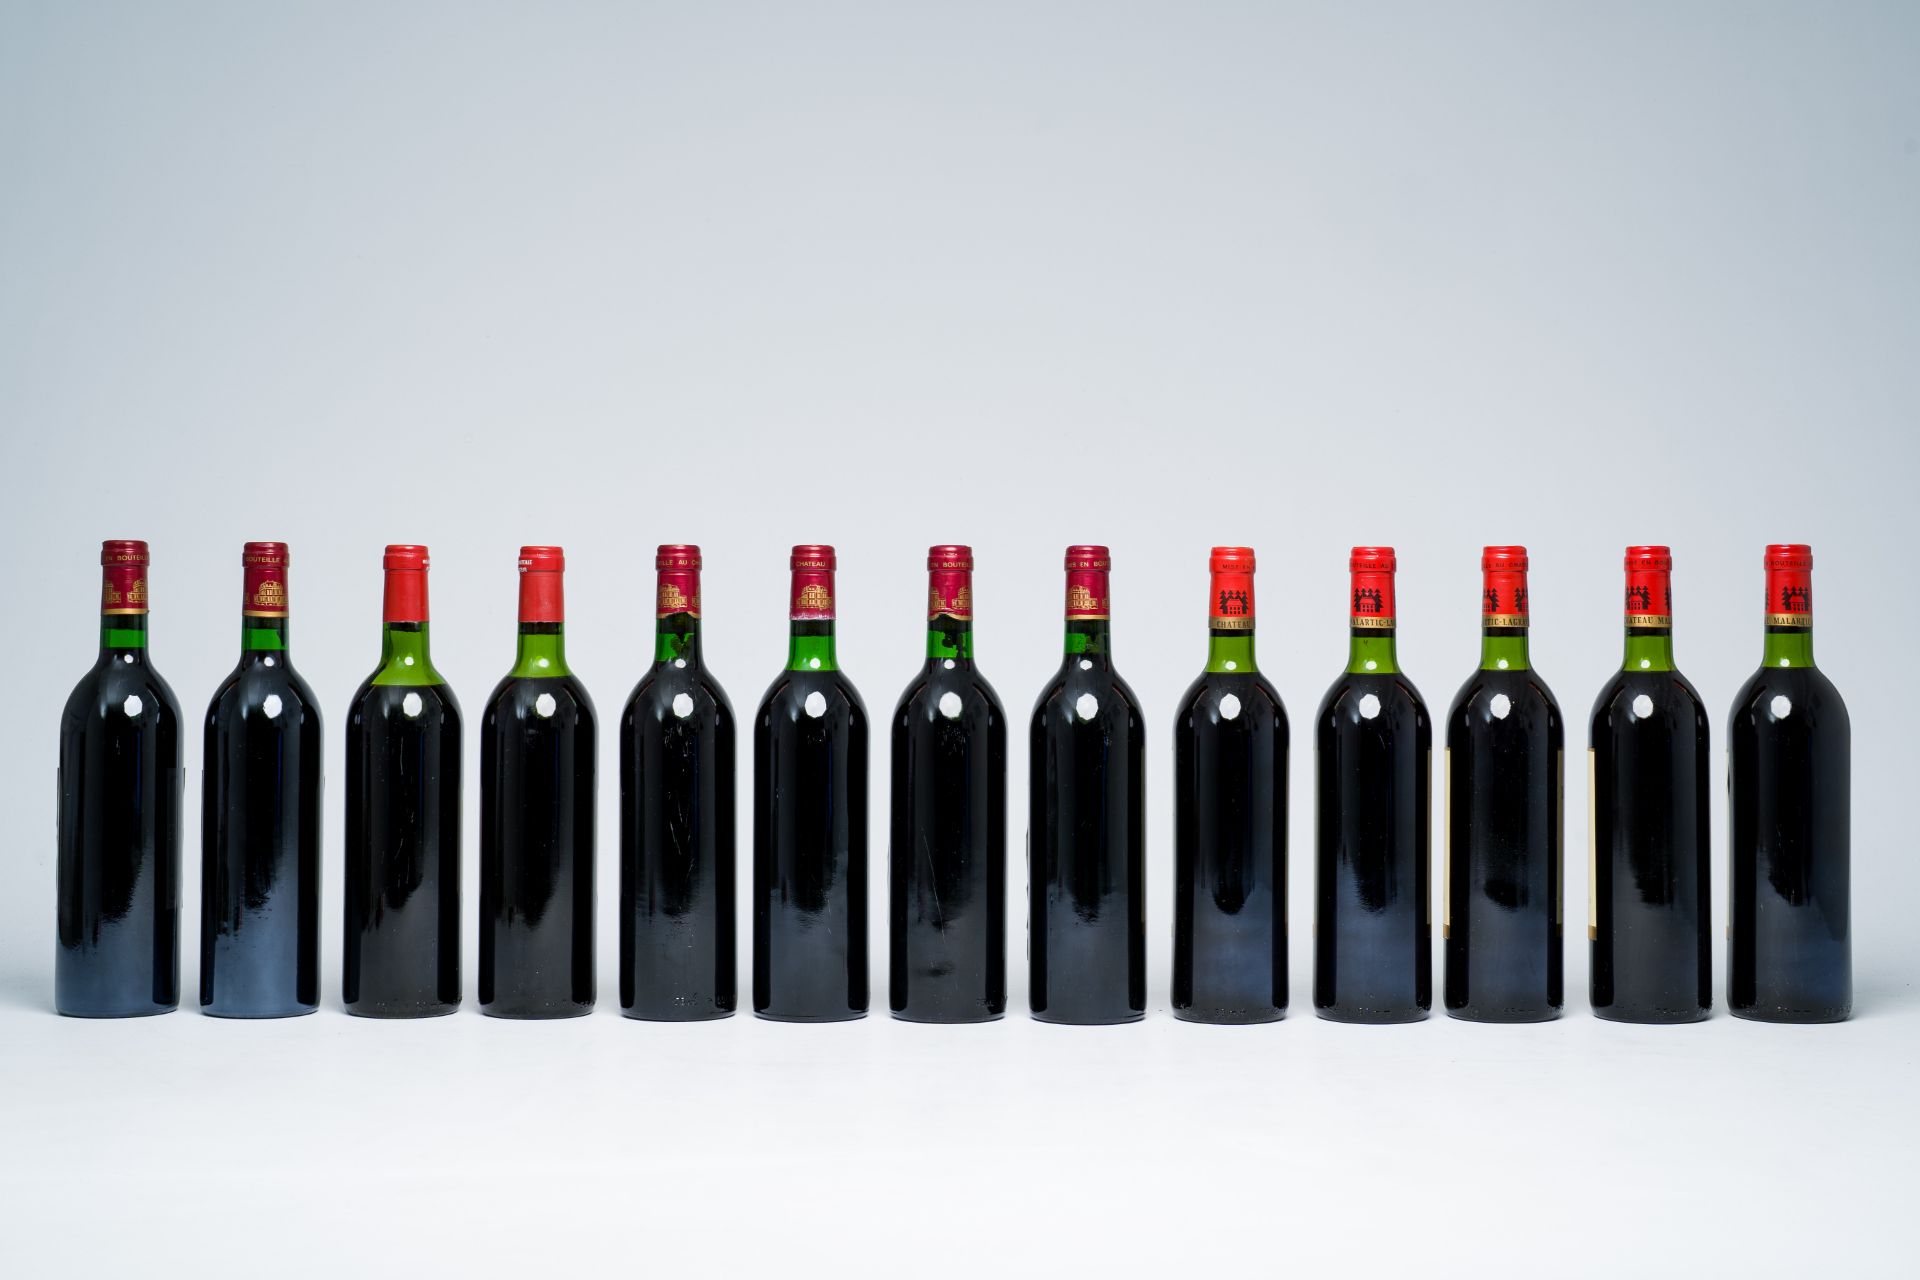 Five bottles of Chateau Malartic-Lagraviere, 4 bot. Ch. Taillefer Pomerol, 2 bot. Ch. Moulinet Pomer - Image 2 of 3